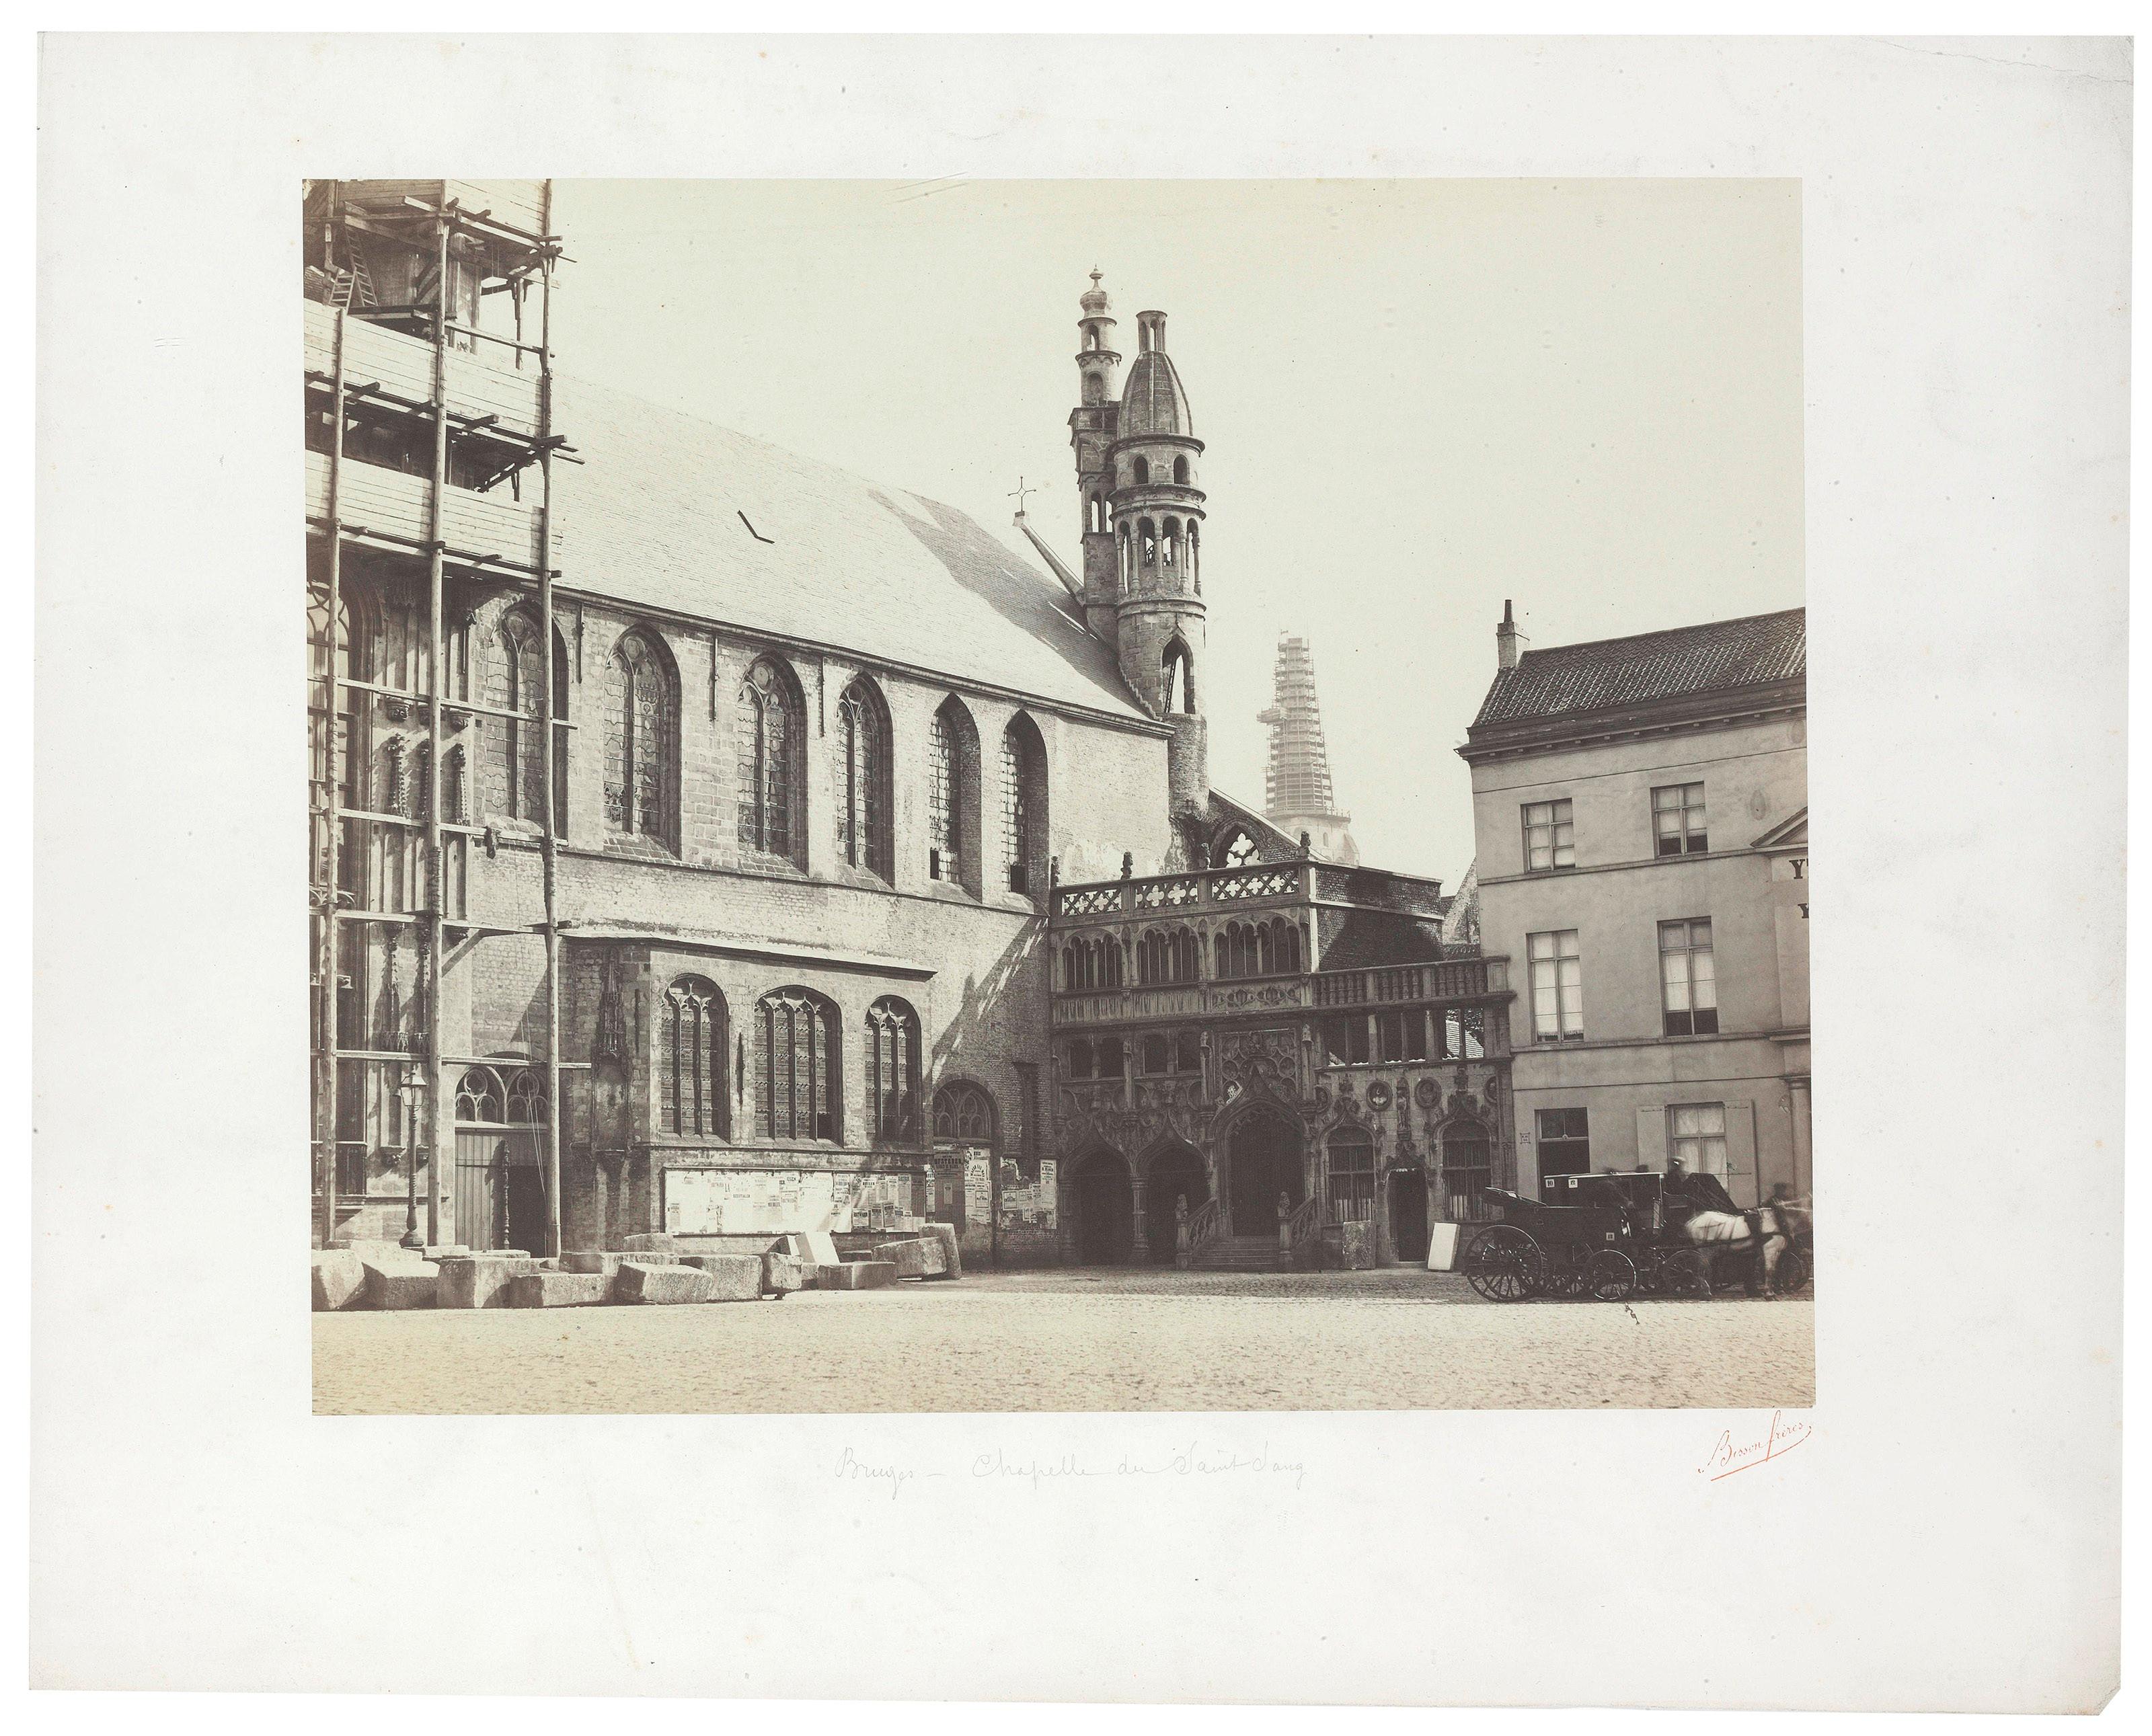 Bisson Frères Black and White Photograph - Architectural Images, Church of Saint Sang, Europe, 1860s